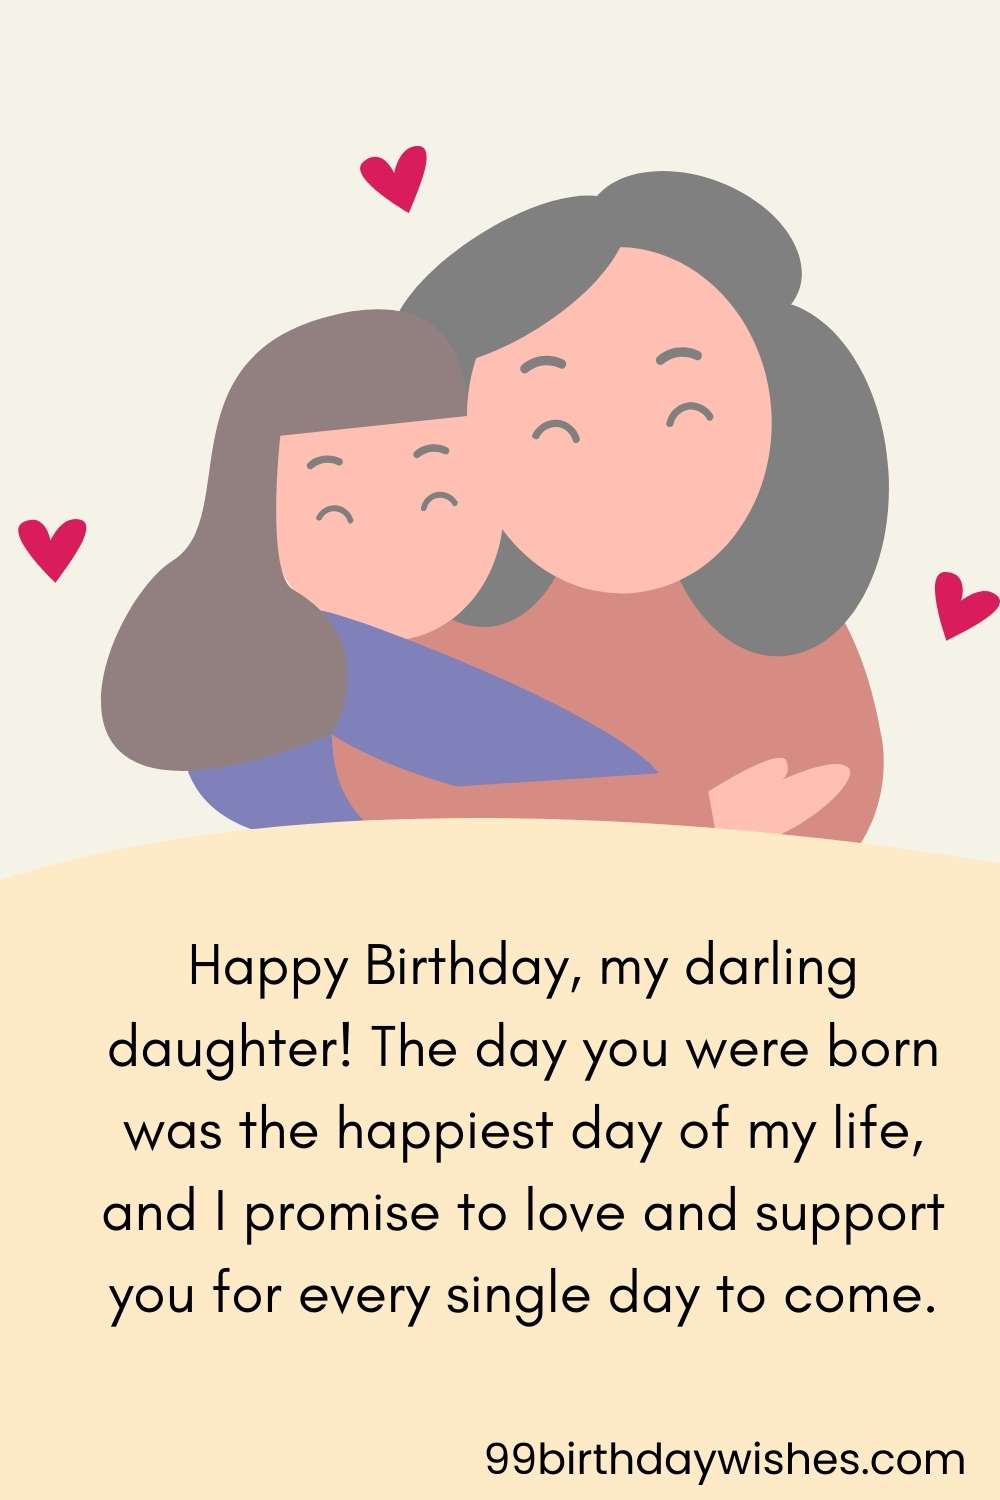 Happy Birthdays Wishes for Daughter from Mom